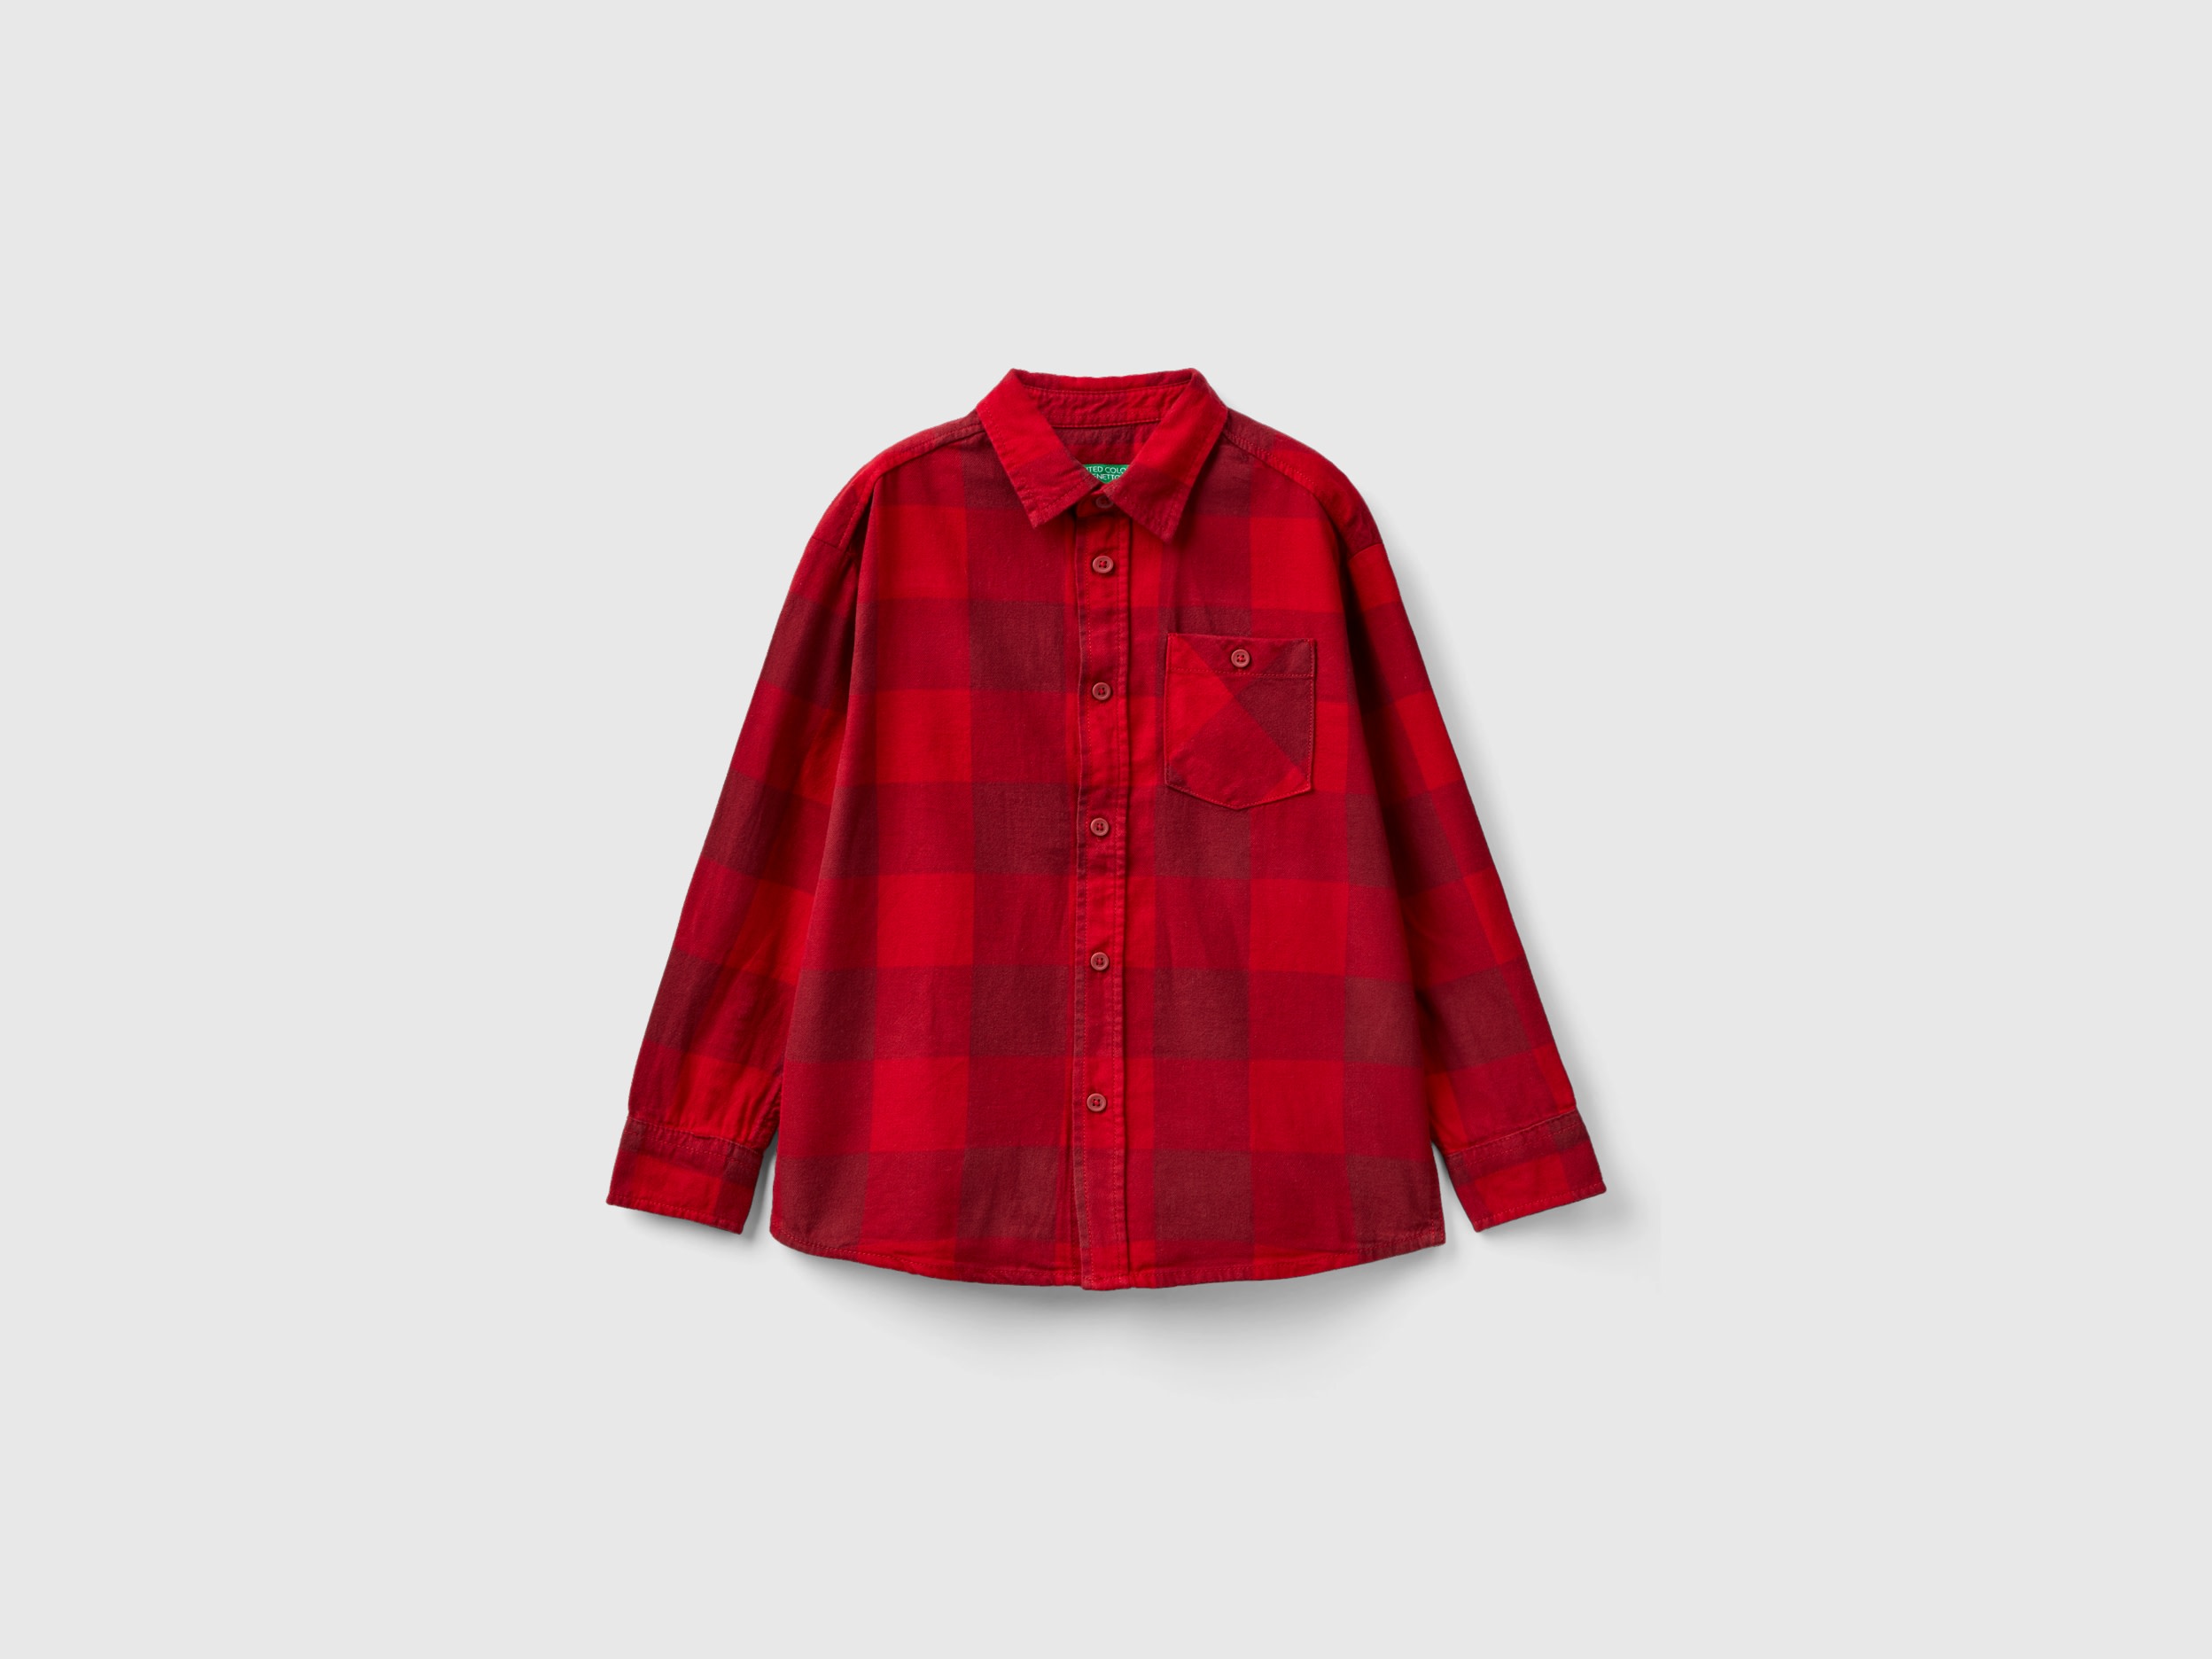 Benetton, Plaid Shirt In 100% Cotton, size 3XL, Red, Kids